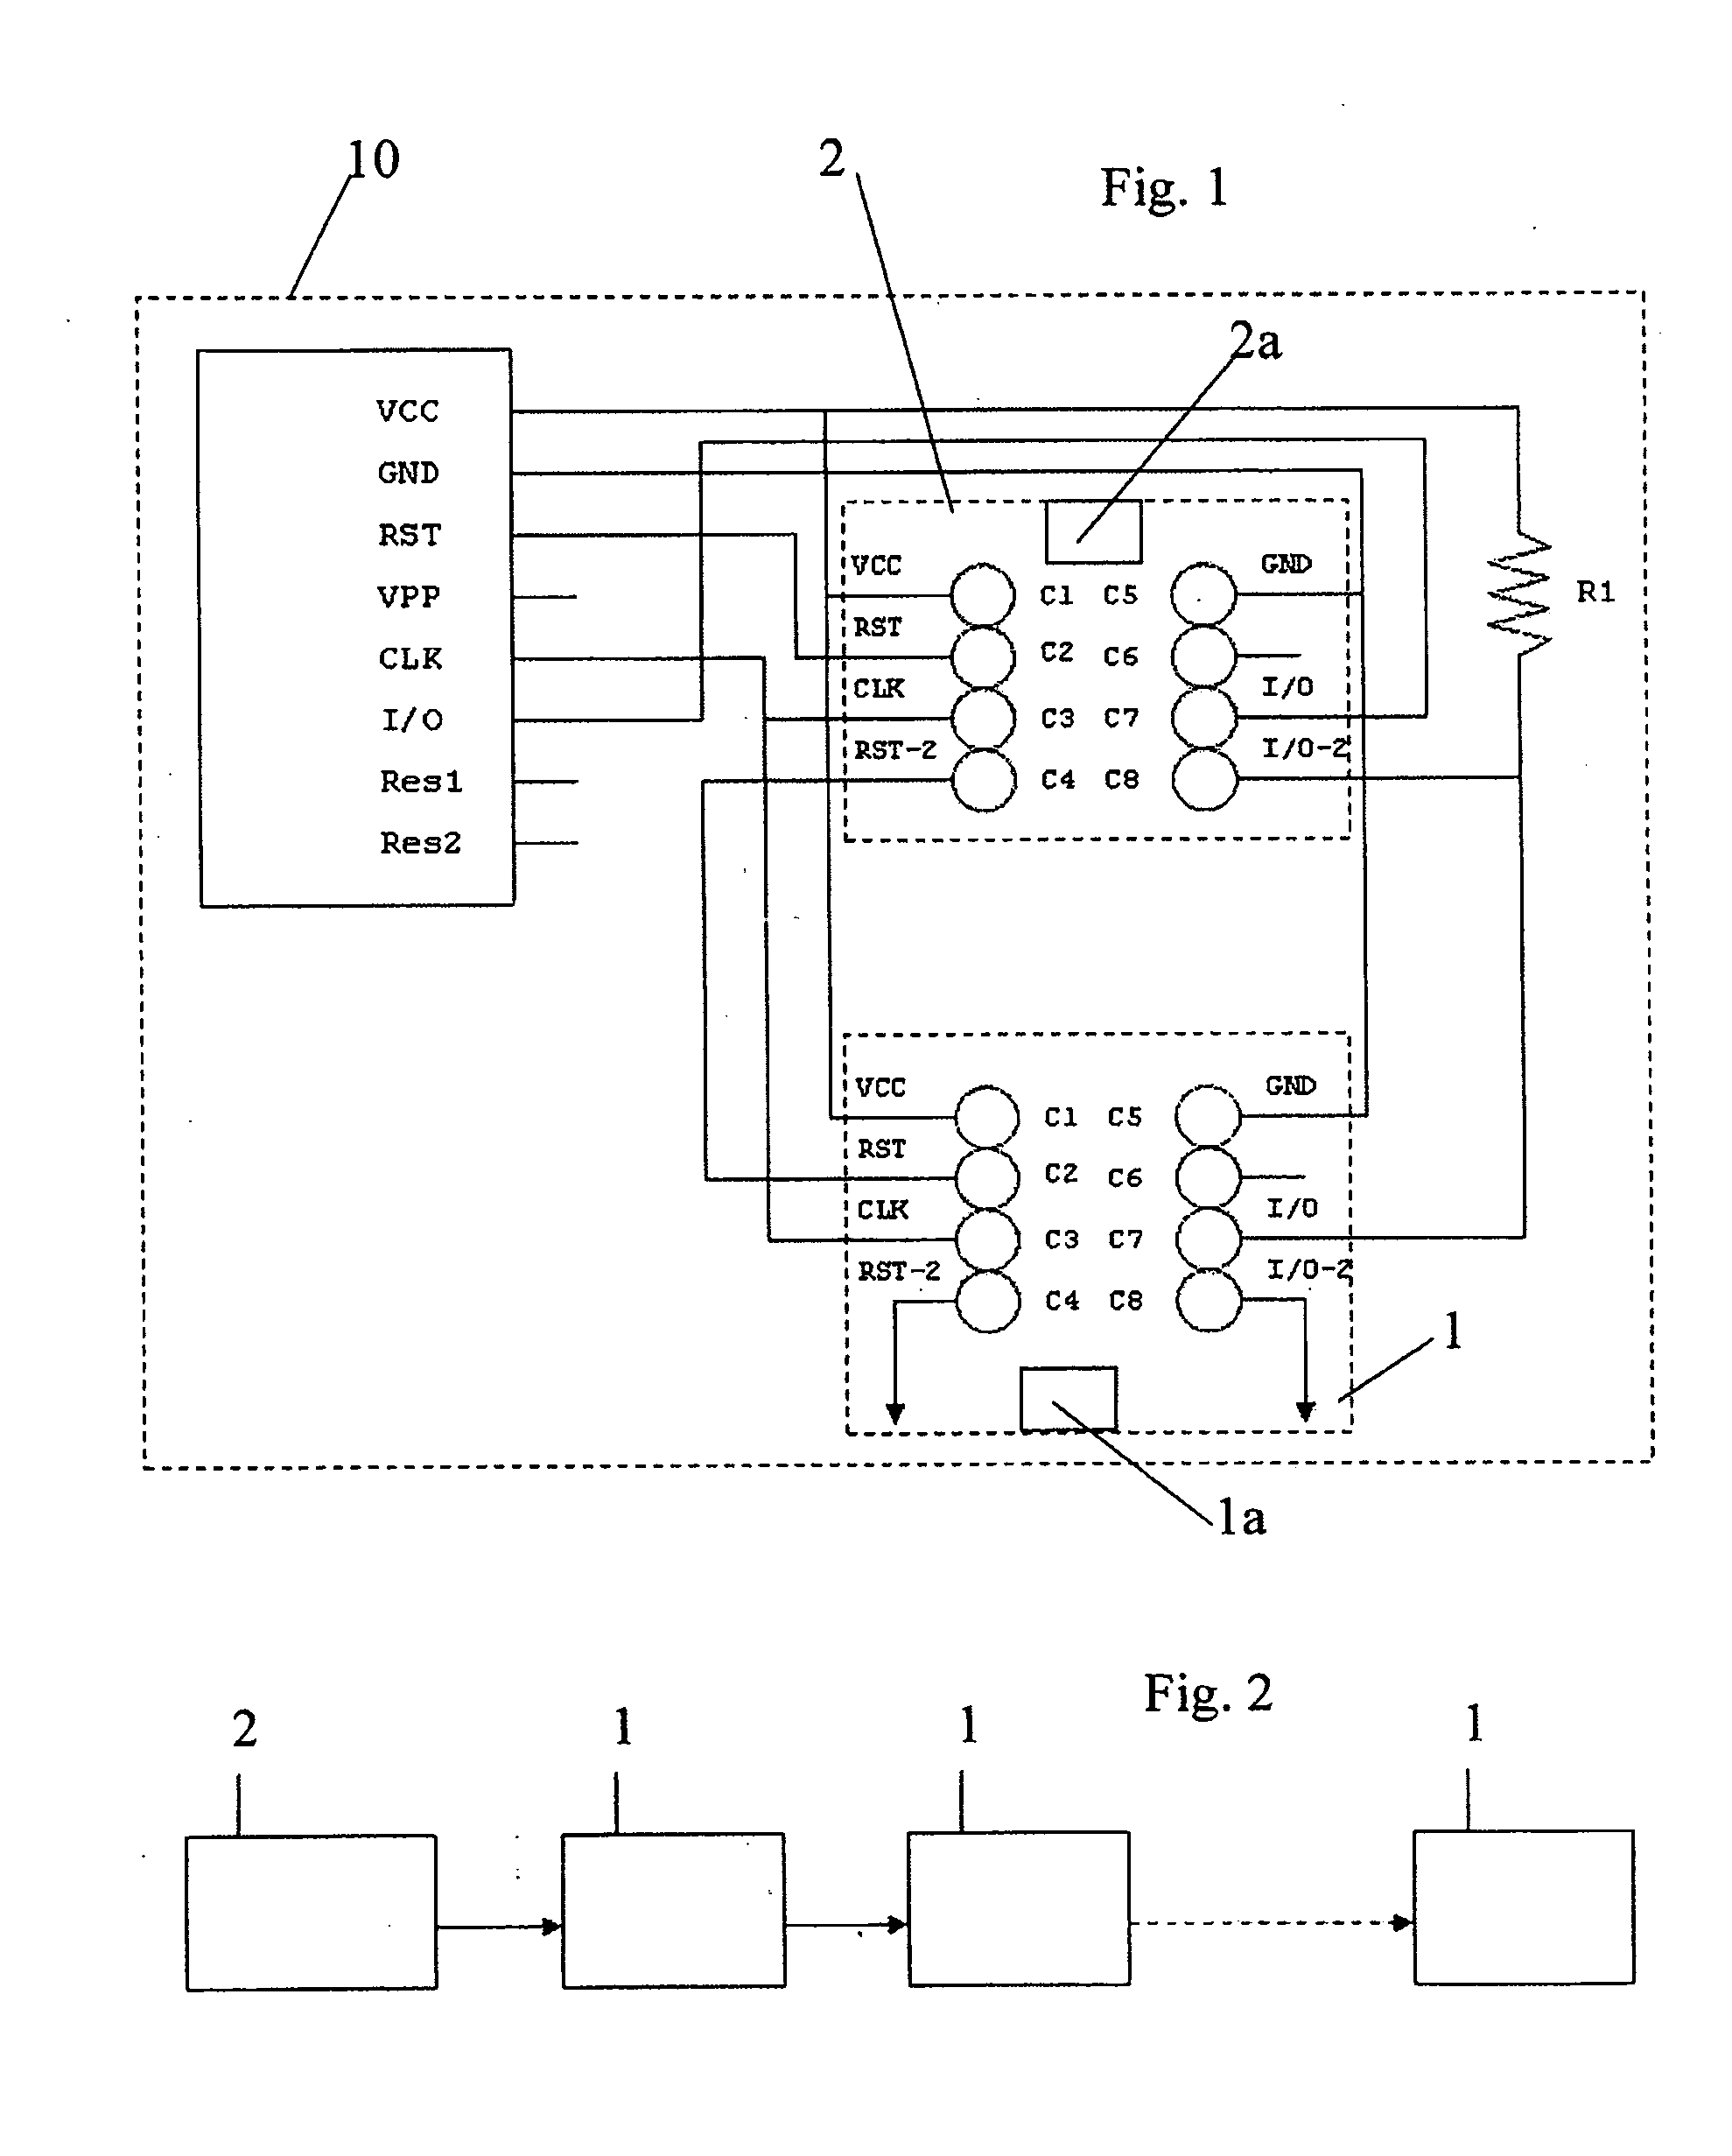 Apparatus and method for initializing an IC card